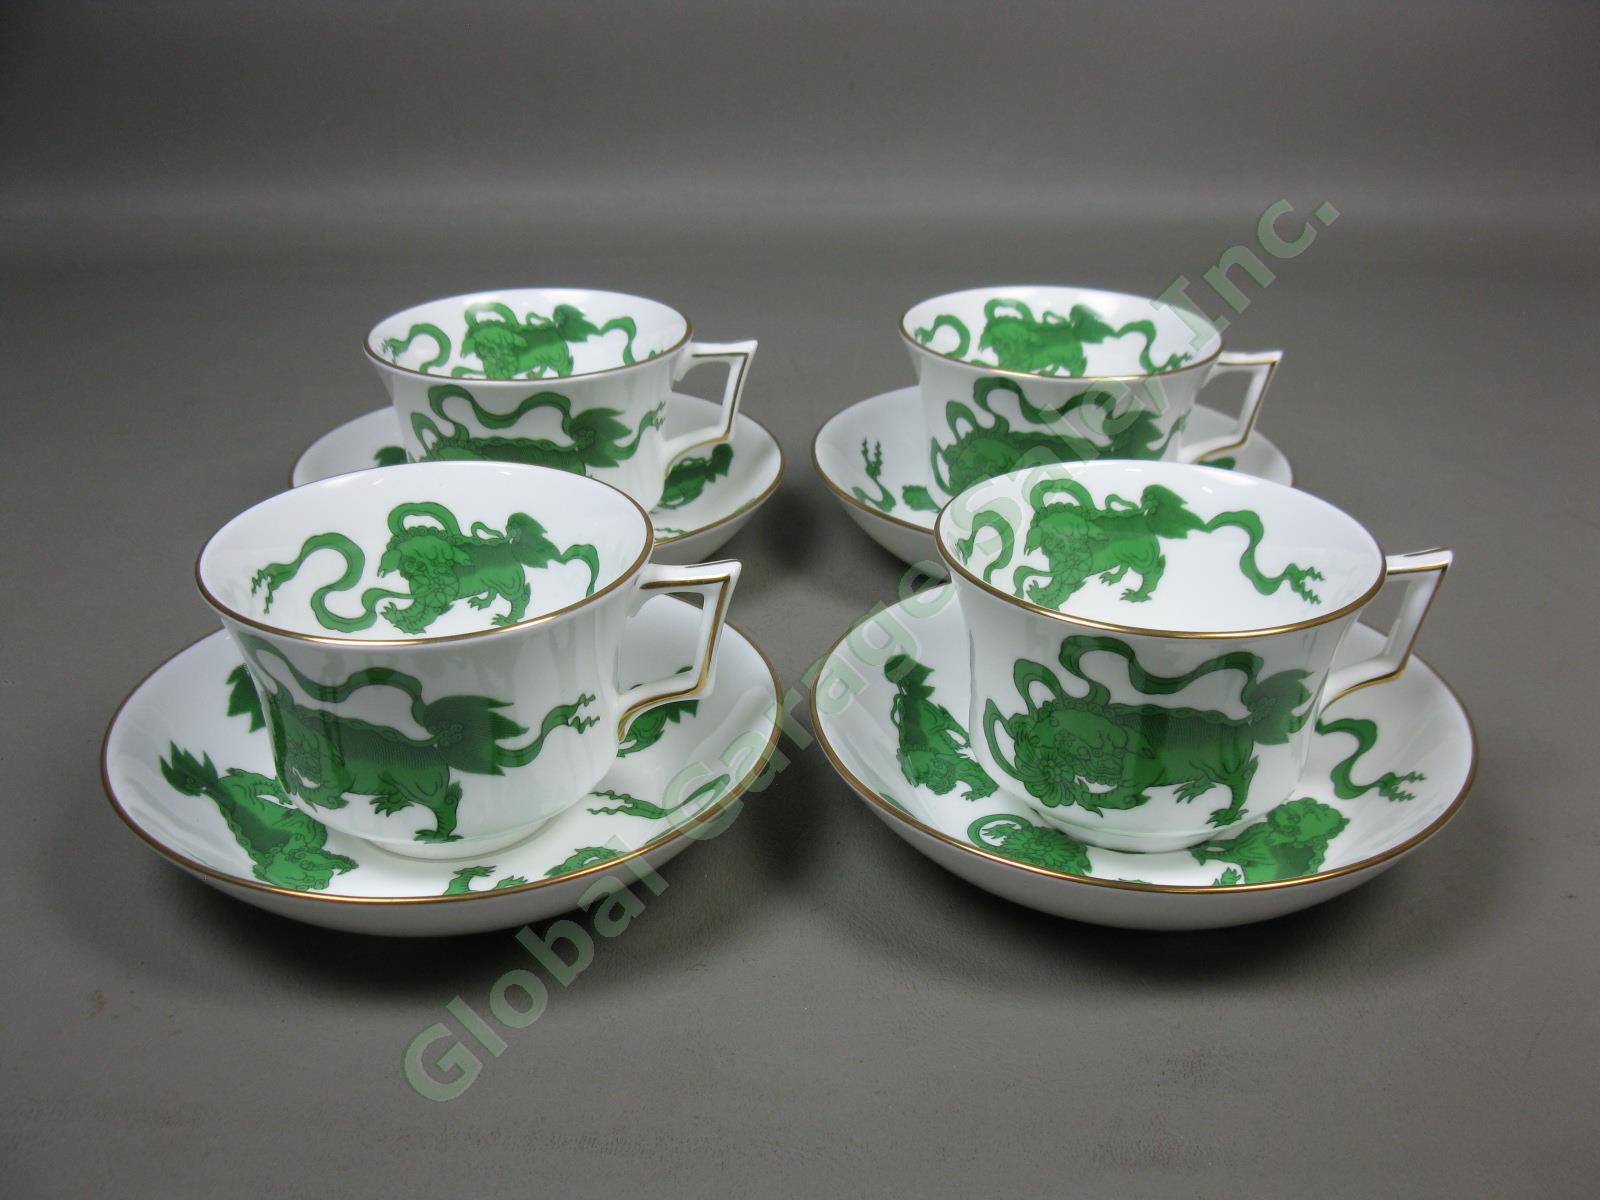 4 Wedgwood England Bone China Chinese Tigers Green Coffee Cups & Saucers Set Lot